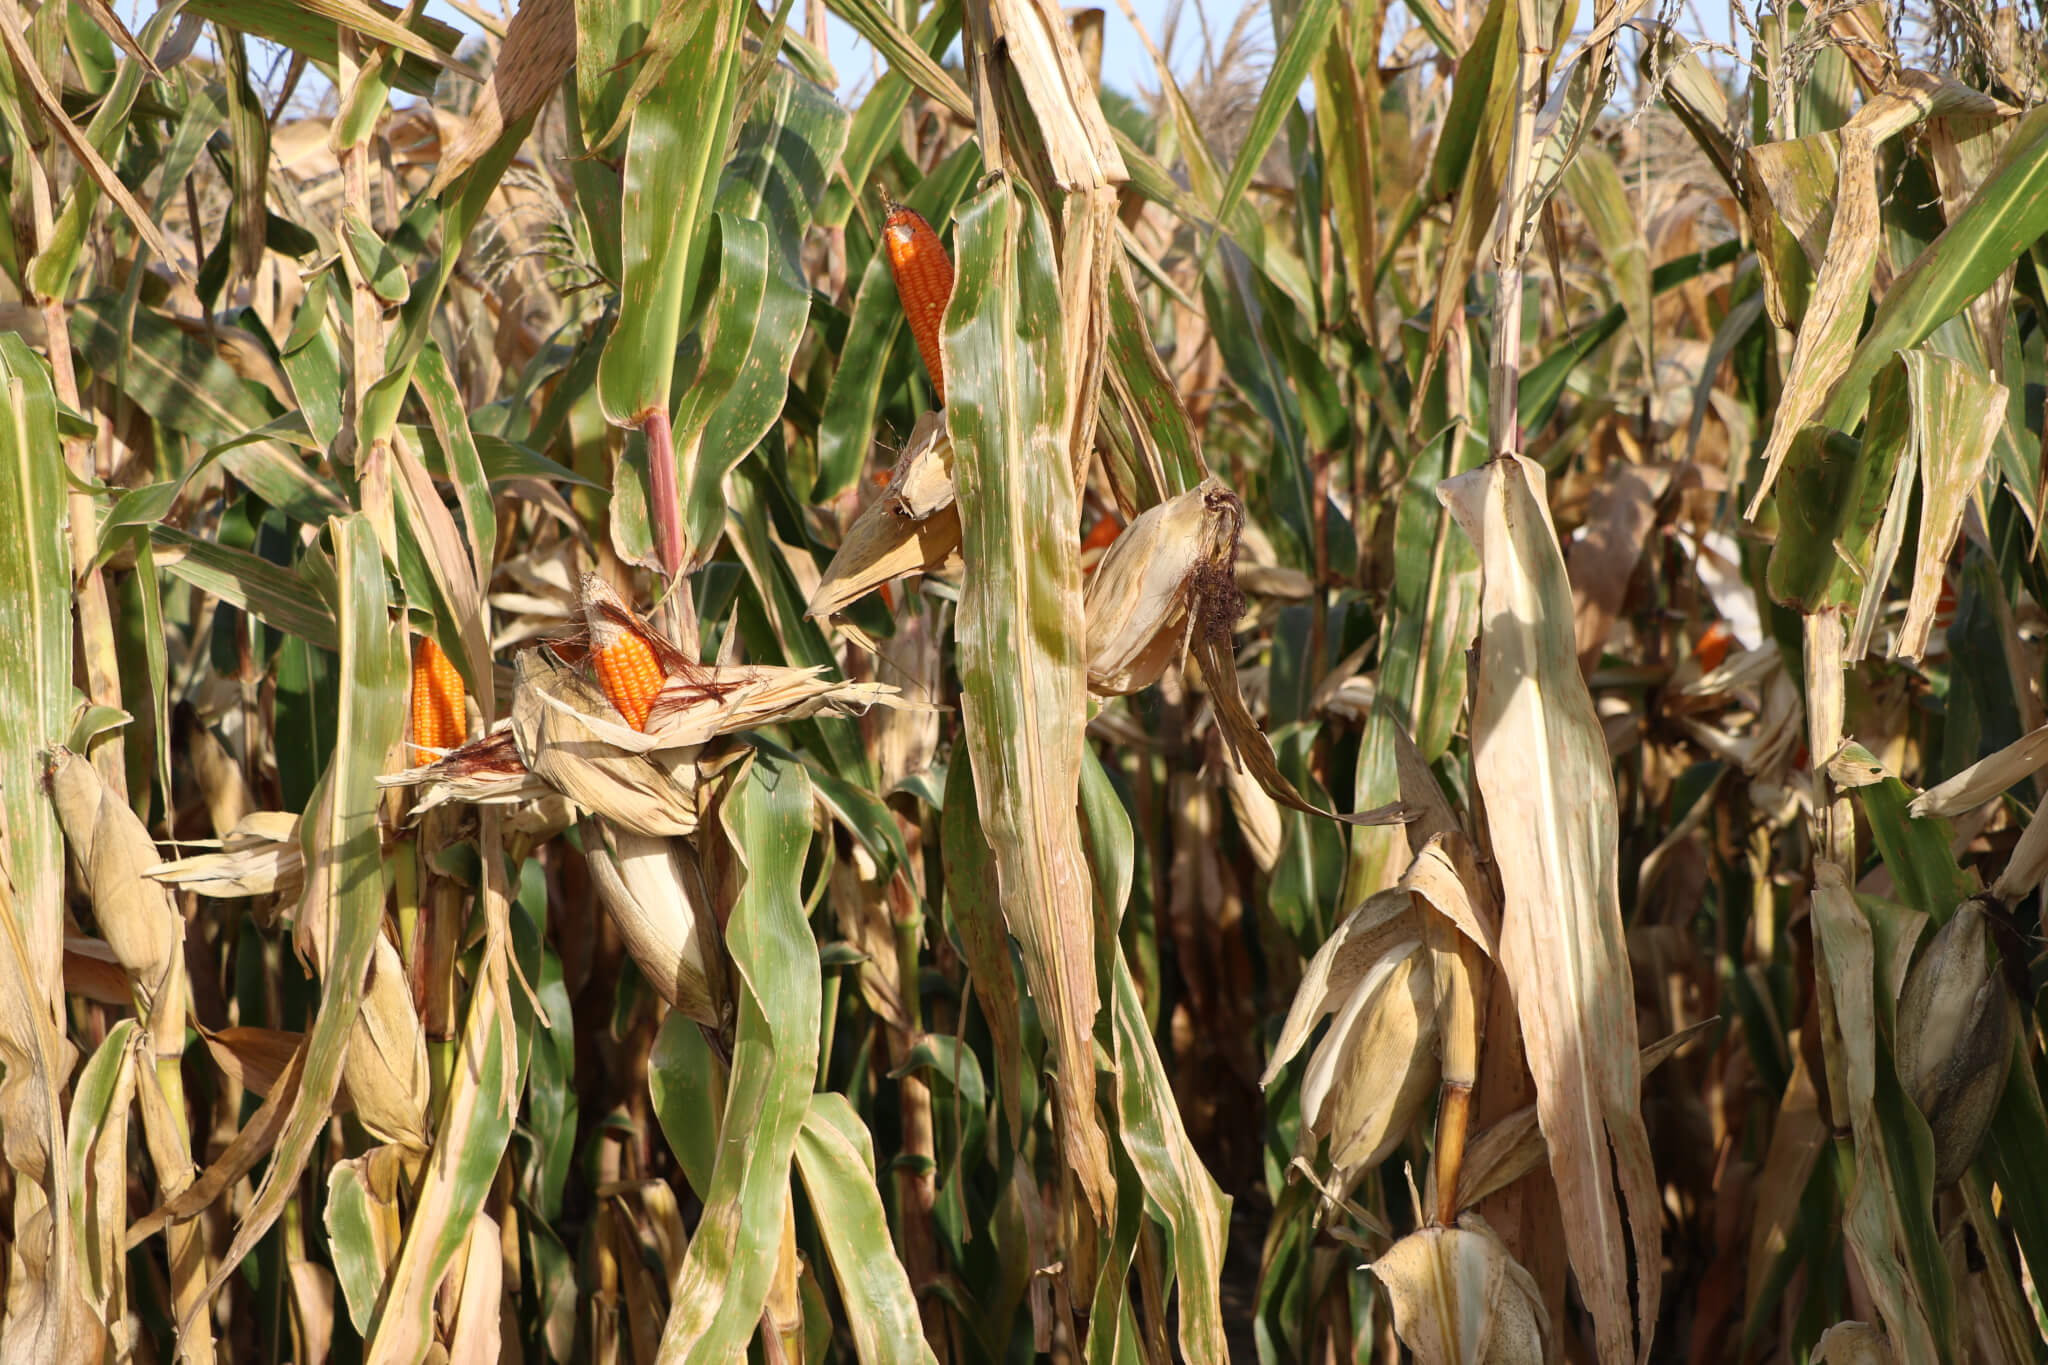 Orange Corn growing at Agronomy Center for Research and Education. Photo by Lauren Coghlan.